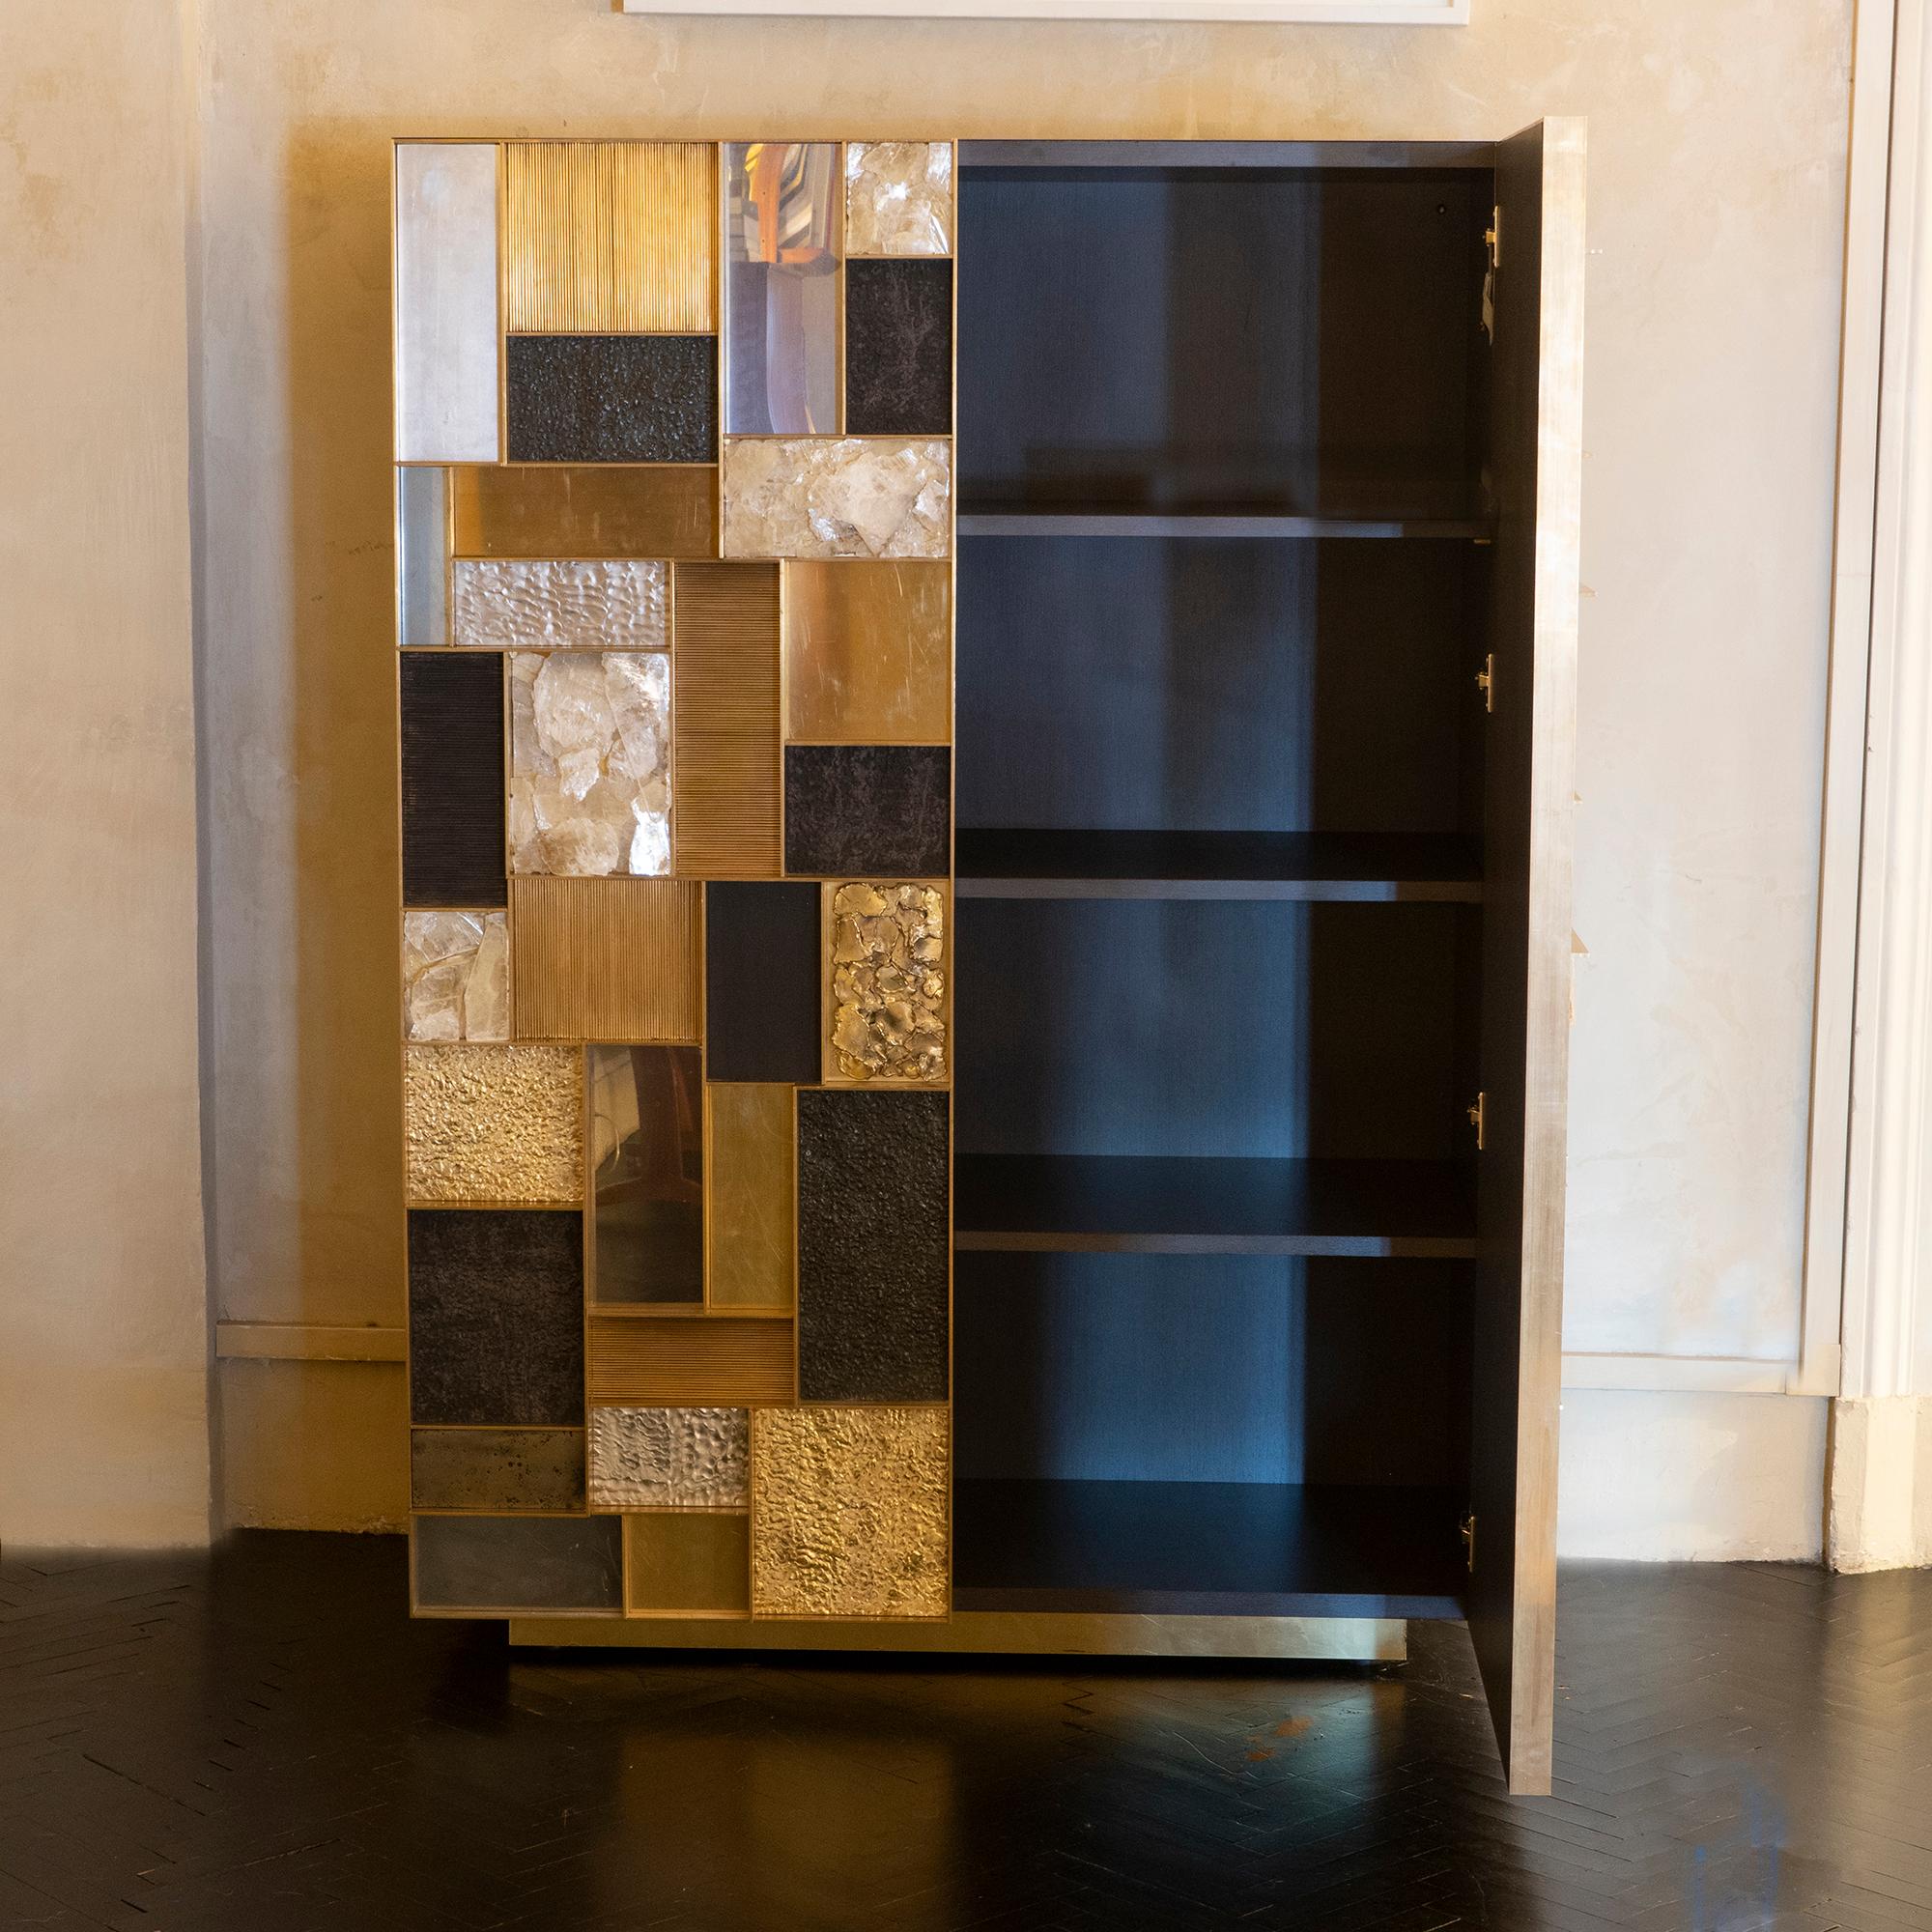 Italian Flair Edition One of a Kind Tall Cabinet in Brass/Steel/Gypsum Crystal, 2018